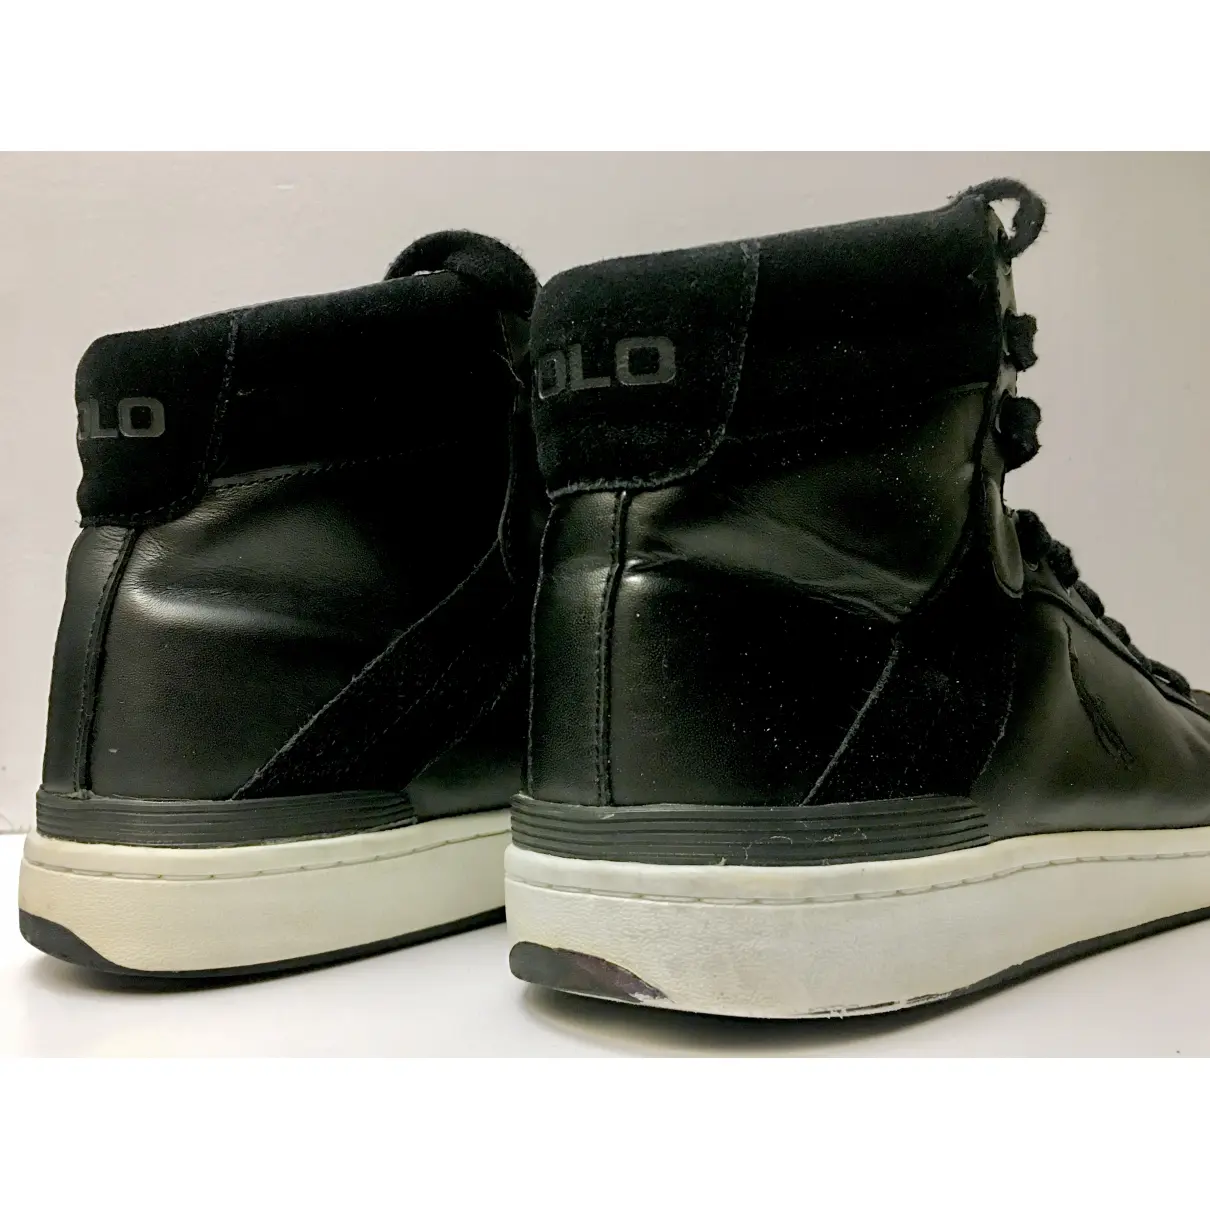 Buy Polo Ralph Lauren Leather high trainers online - Vintage